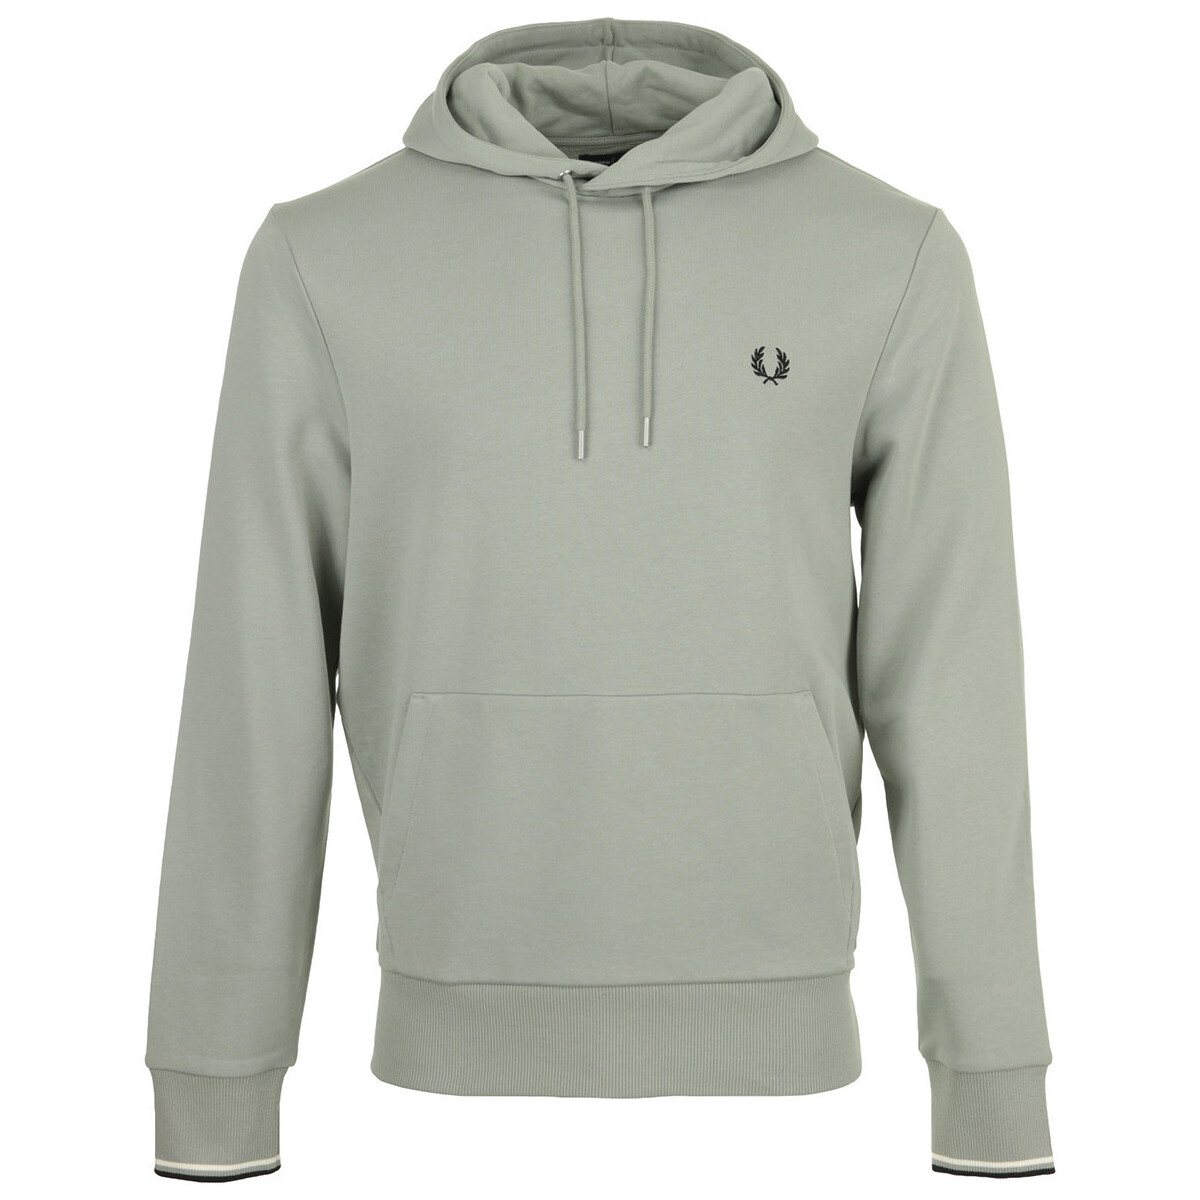 Fred Perry  Tipped Hooded Sweatshirt  Mikiny Šedá